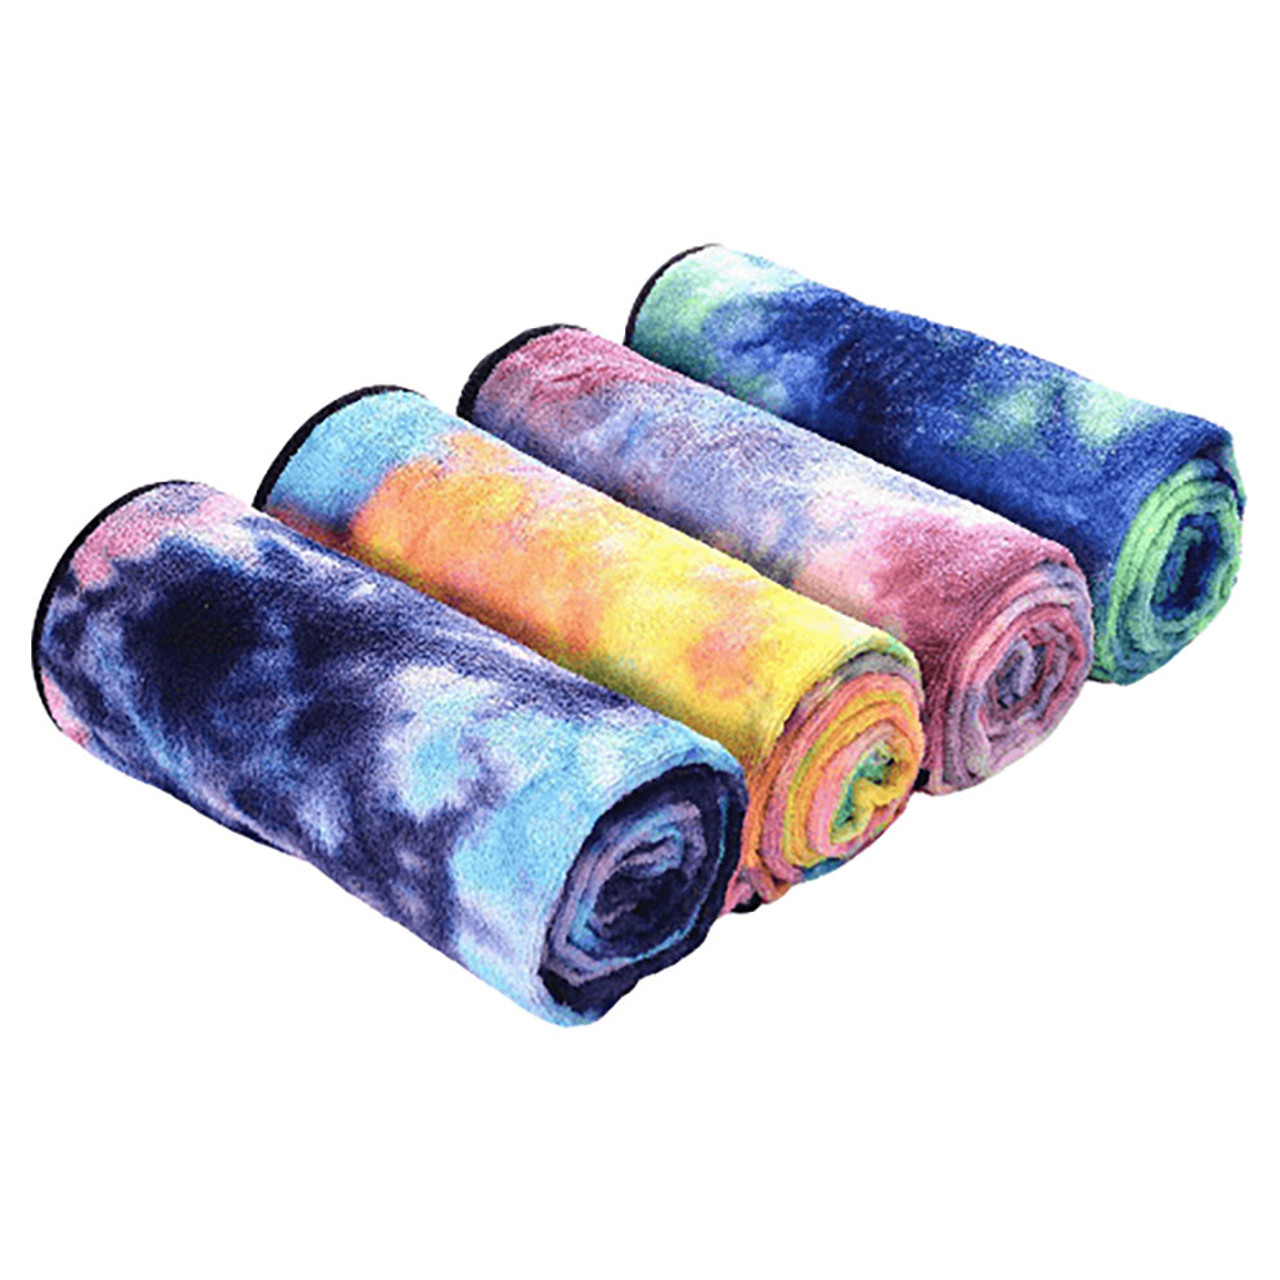 Tie-Dye Yoga Mat Towel with Slip-Resistant Grip Dots product image